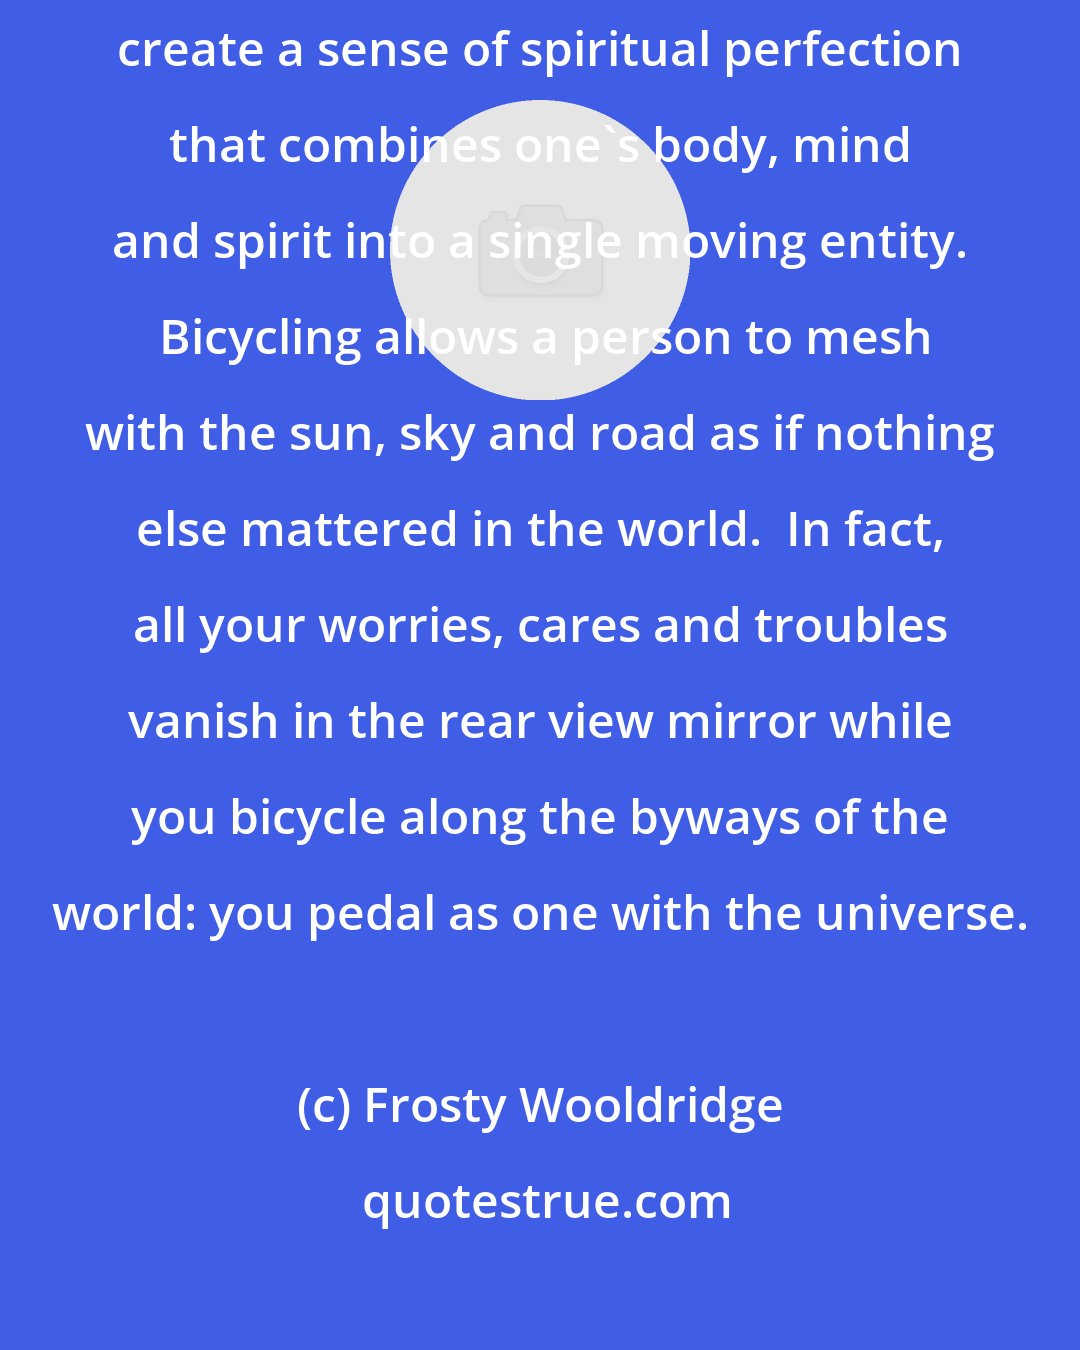 Frosty Wooldridge: Bicycling unites physical harmony coupled with emotional bliss to create a sense of spiritual perfection that combines one's body, mind and spirit into a single moving entity.  Bicycling allows a person to mesh with the sun, sky and road as if nothing else mattered in the world.  In fact, all your worries, cares and troubles vanish in the rear view mirror while you bicycle along the byways of the world: you pedal as one with the universe.